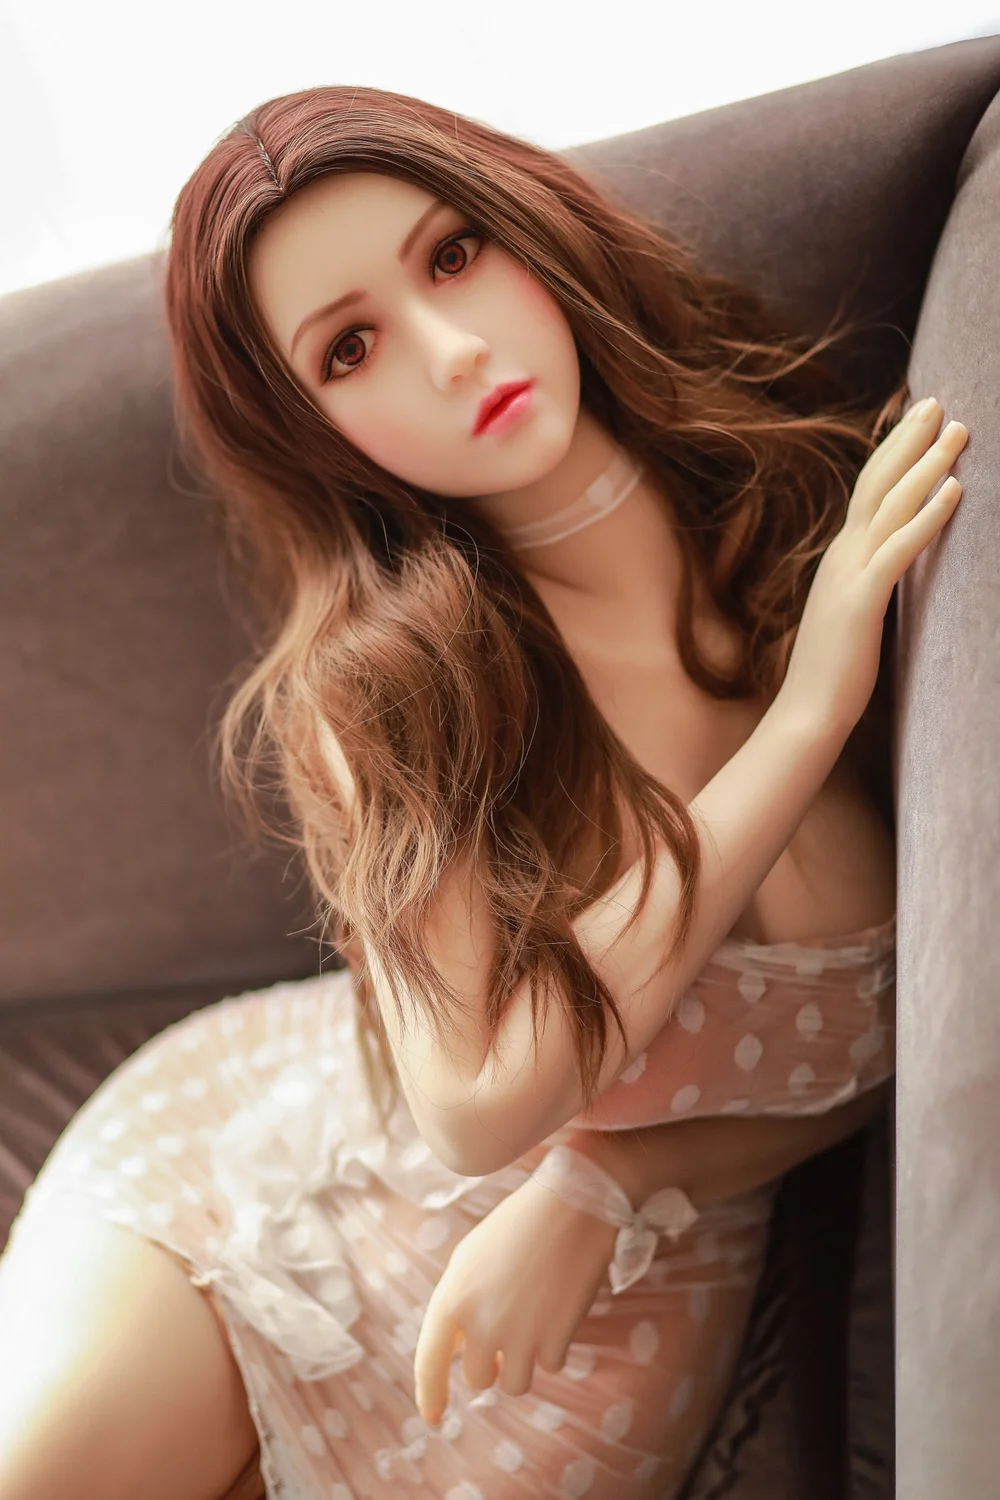 Brown-haired sex doll